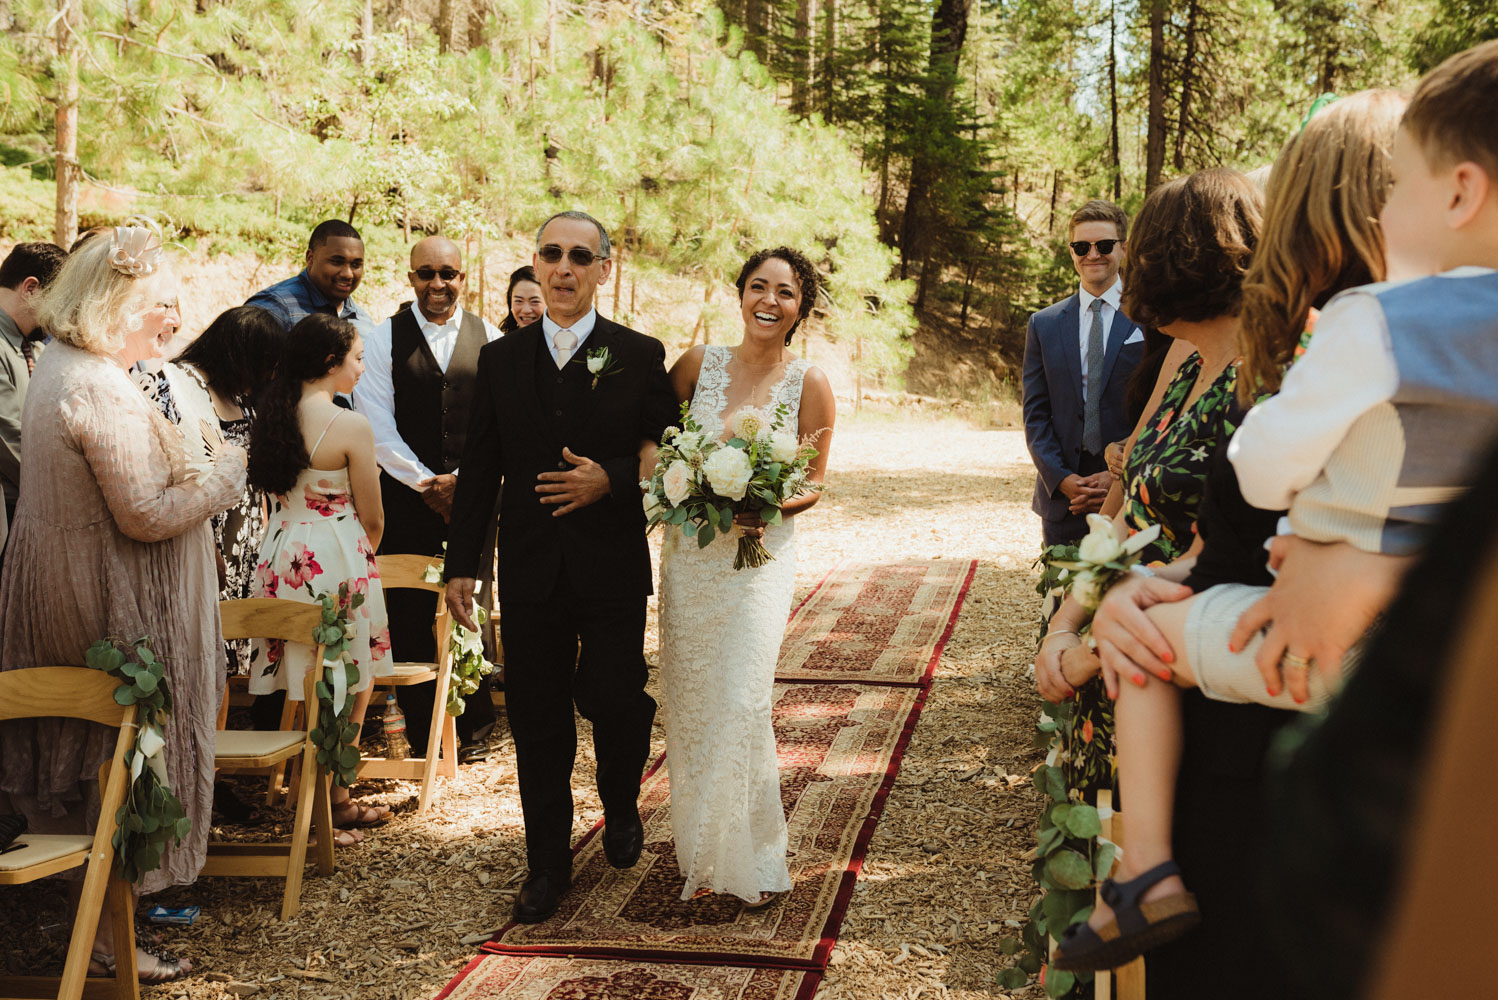 Rush Creek Lodge Wedding, photo of bride walking down the aisle with her dad